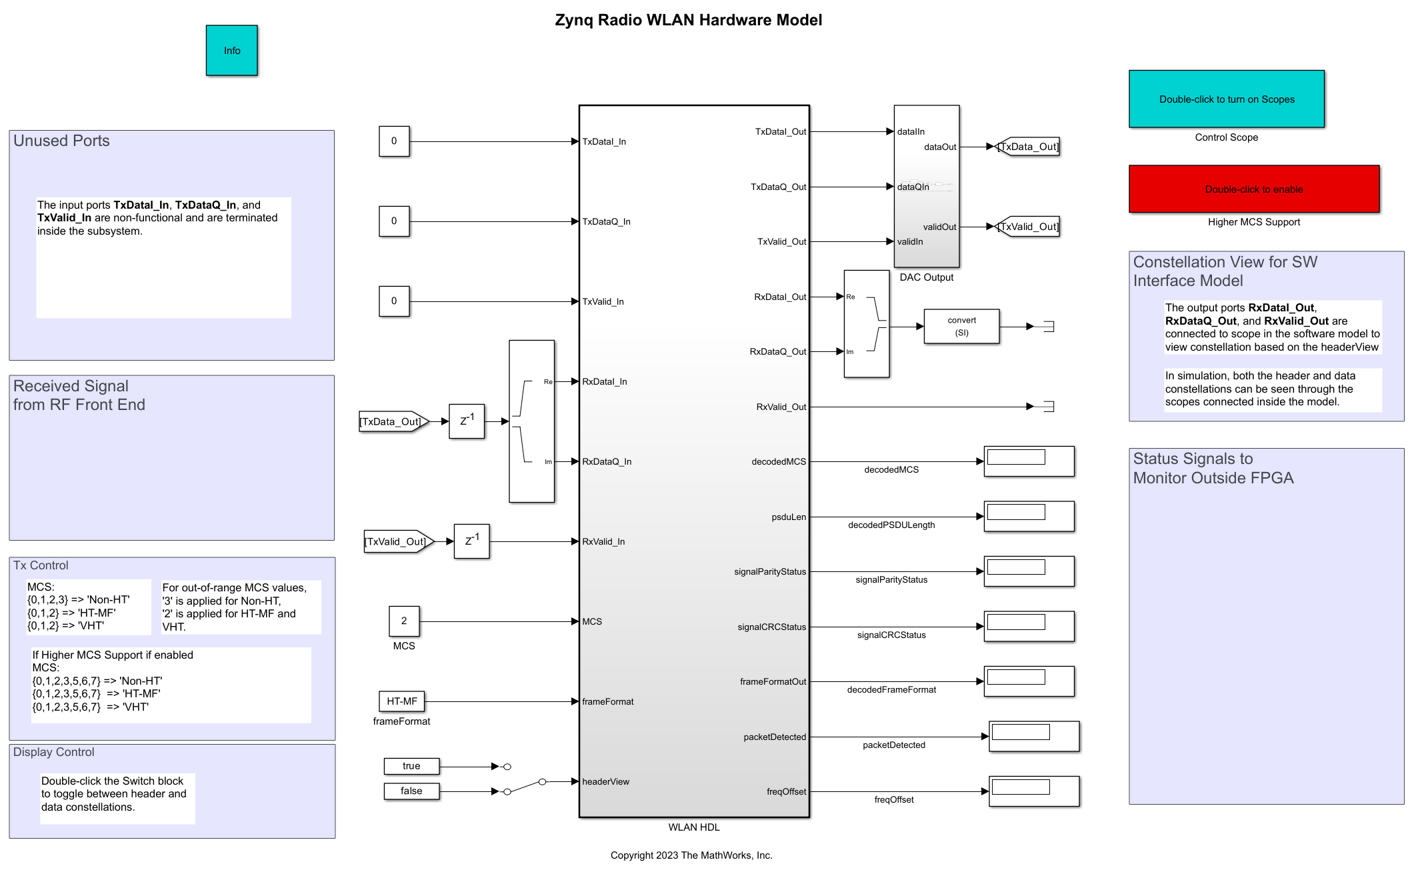 WLAN Receiver Using Analog Devices AD9361/AD9364